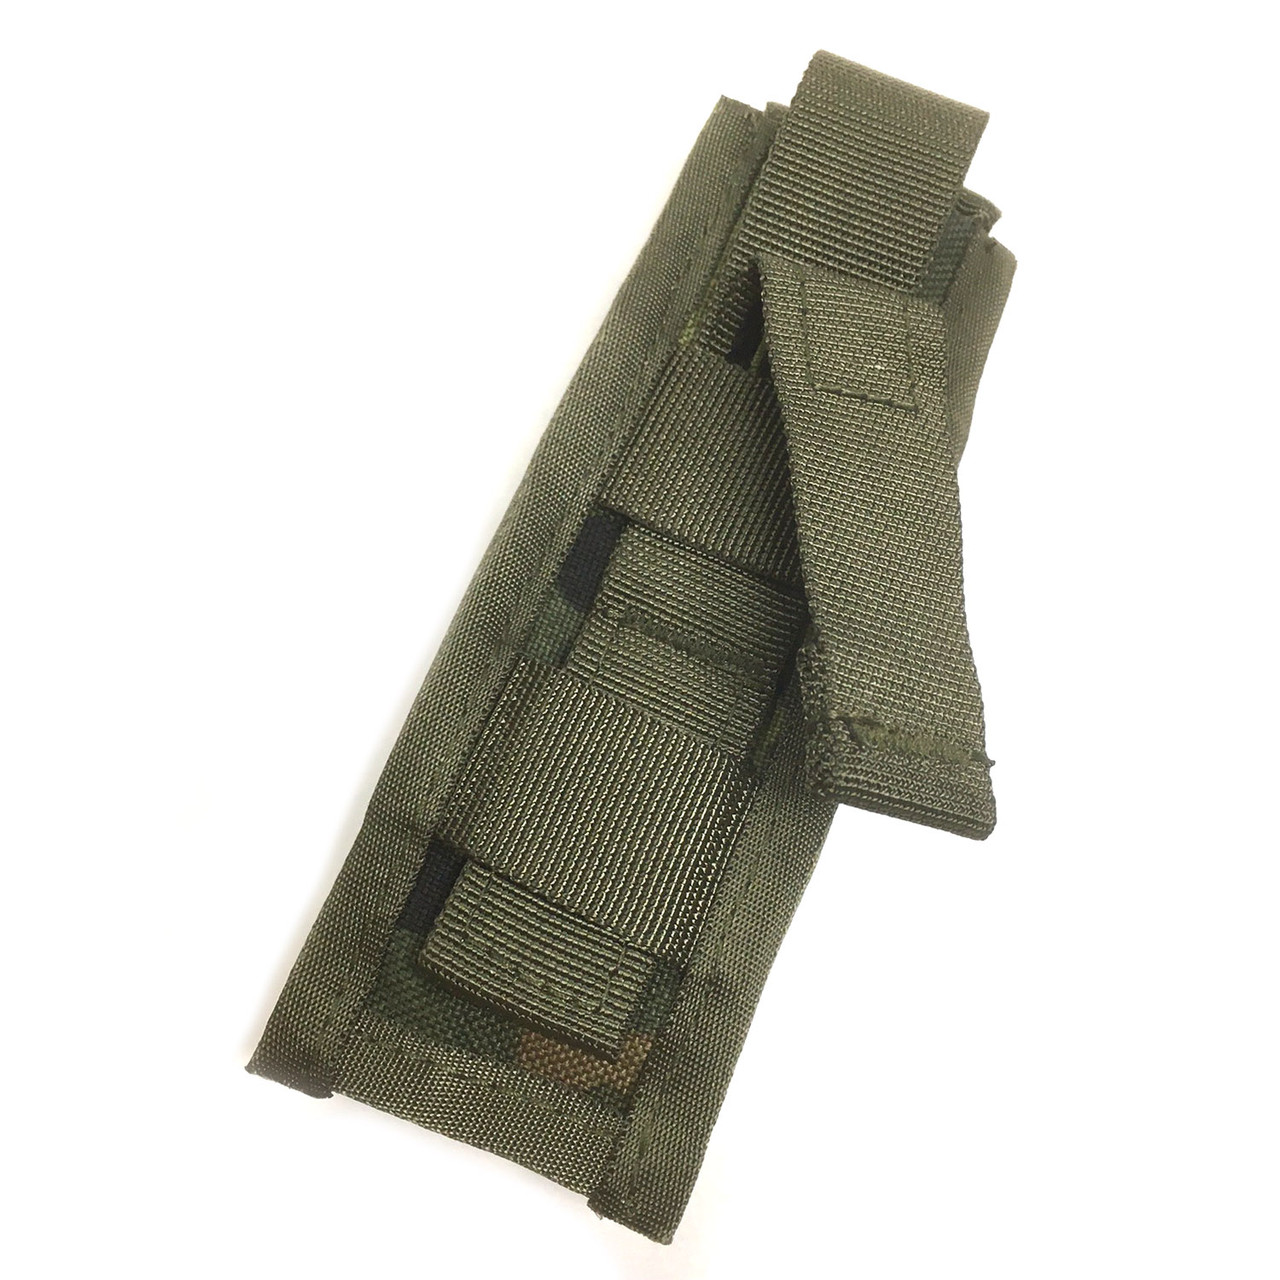 75Tactical Magazine Pouch TecSys Mx1 from Hessen Antique